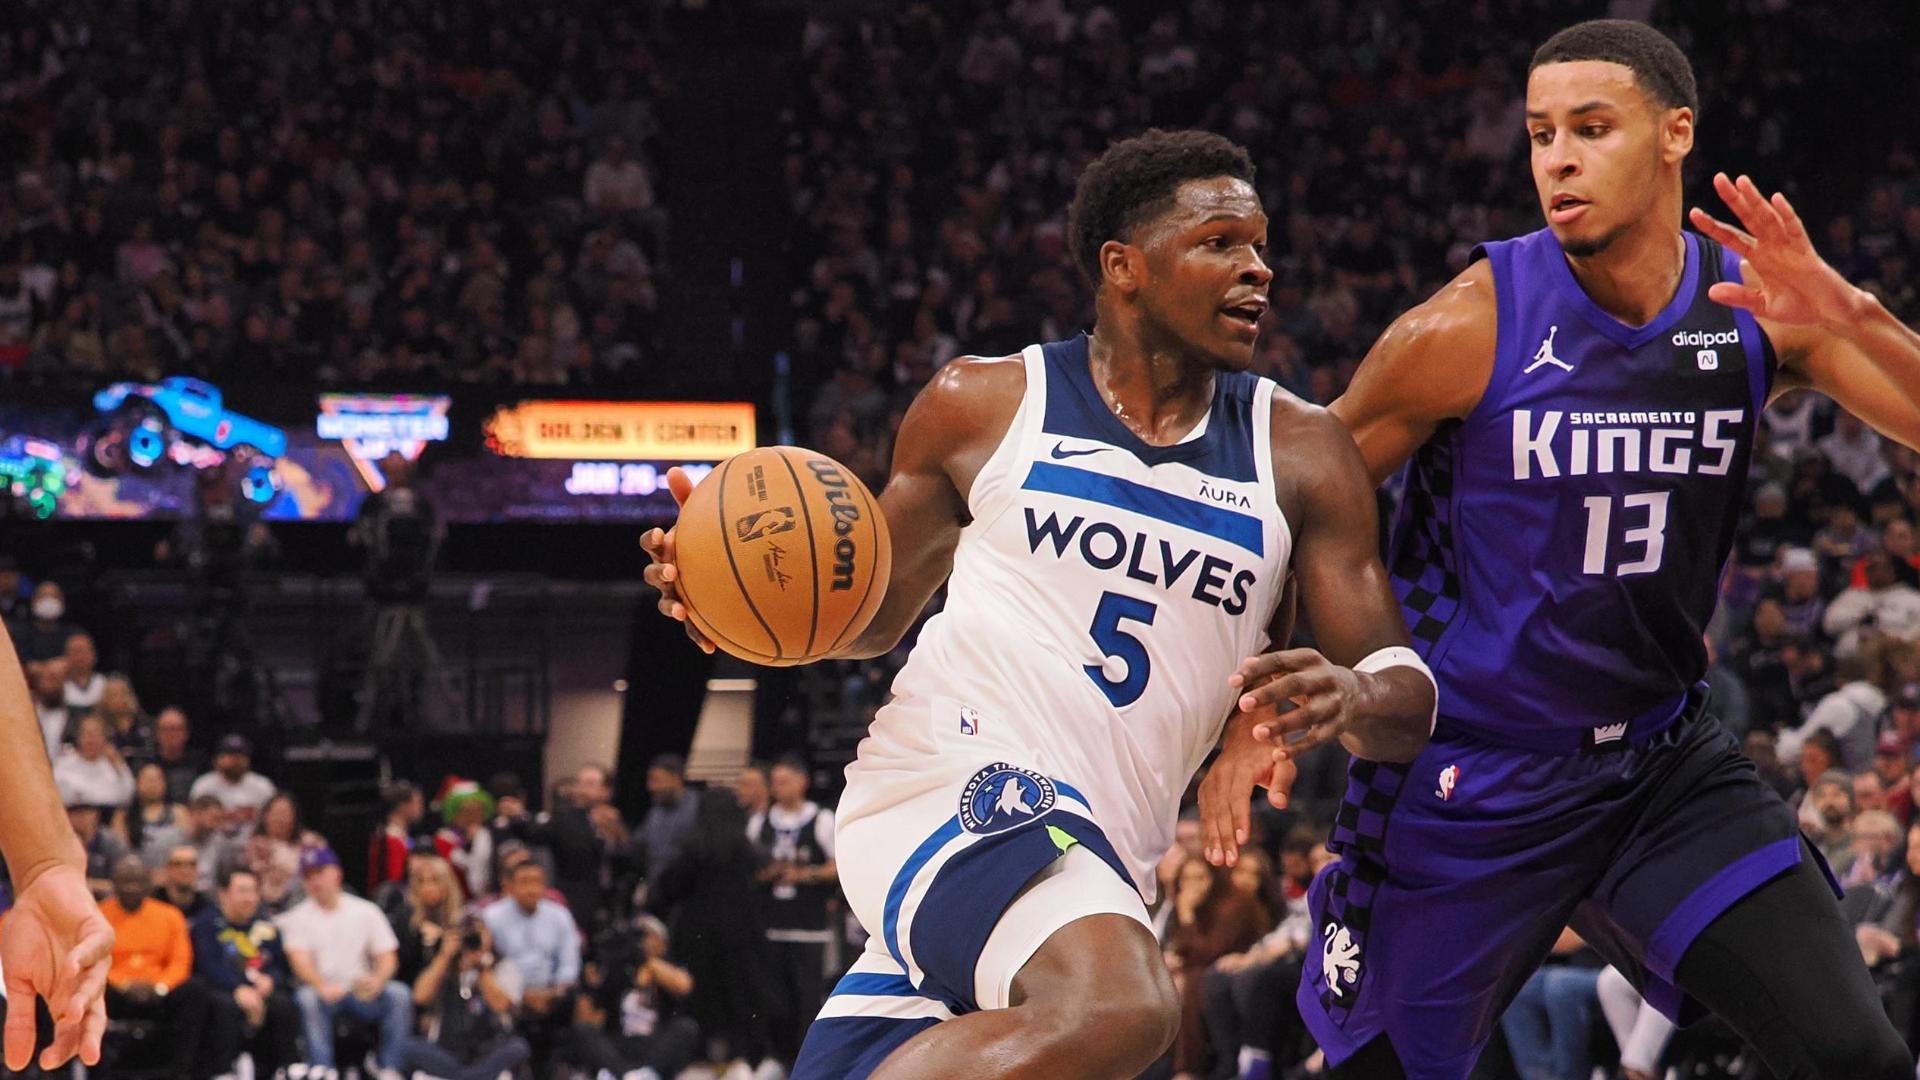 Photo: timberwolves and kings player